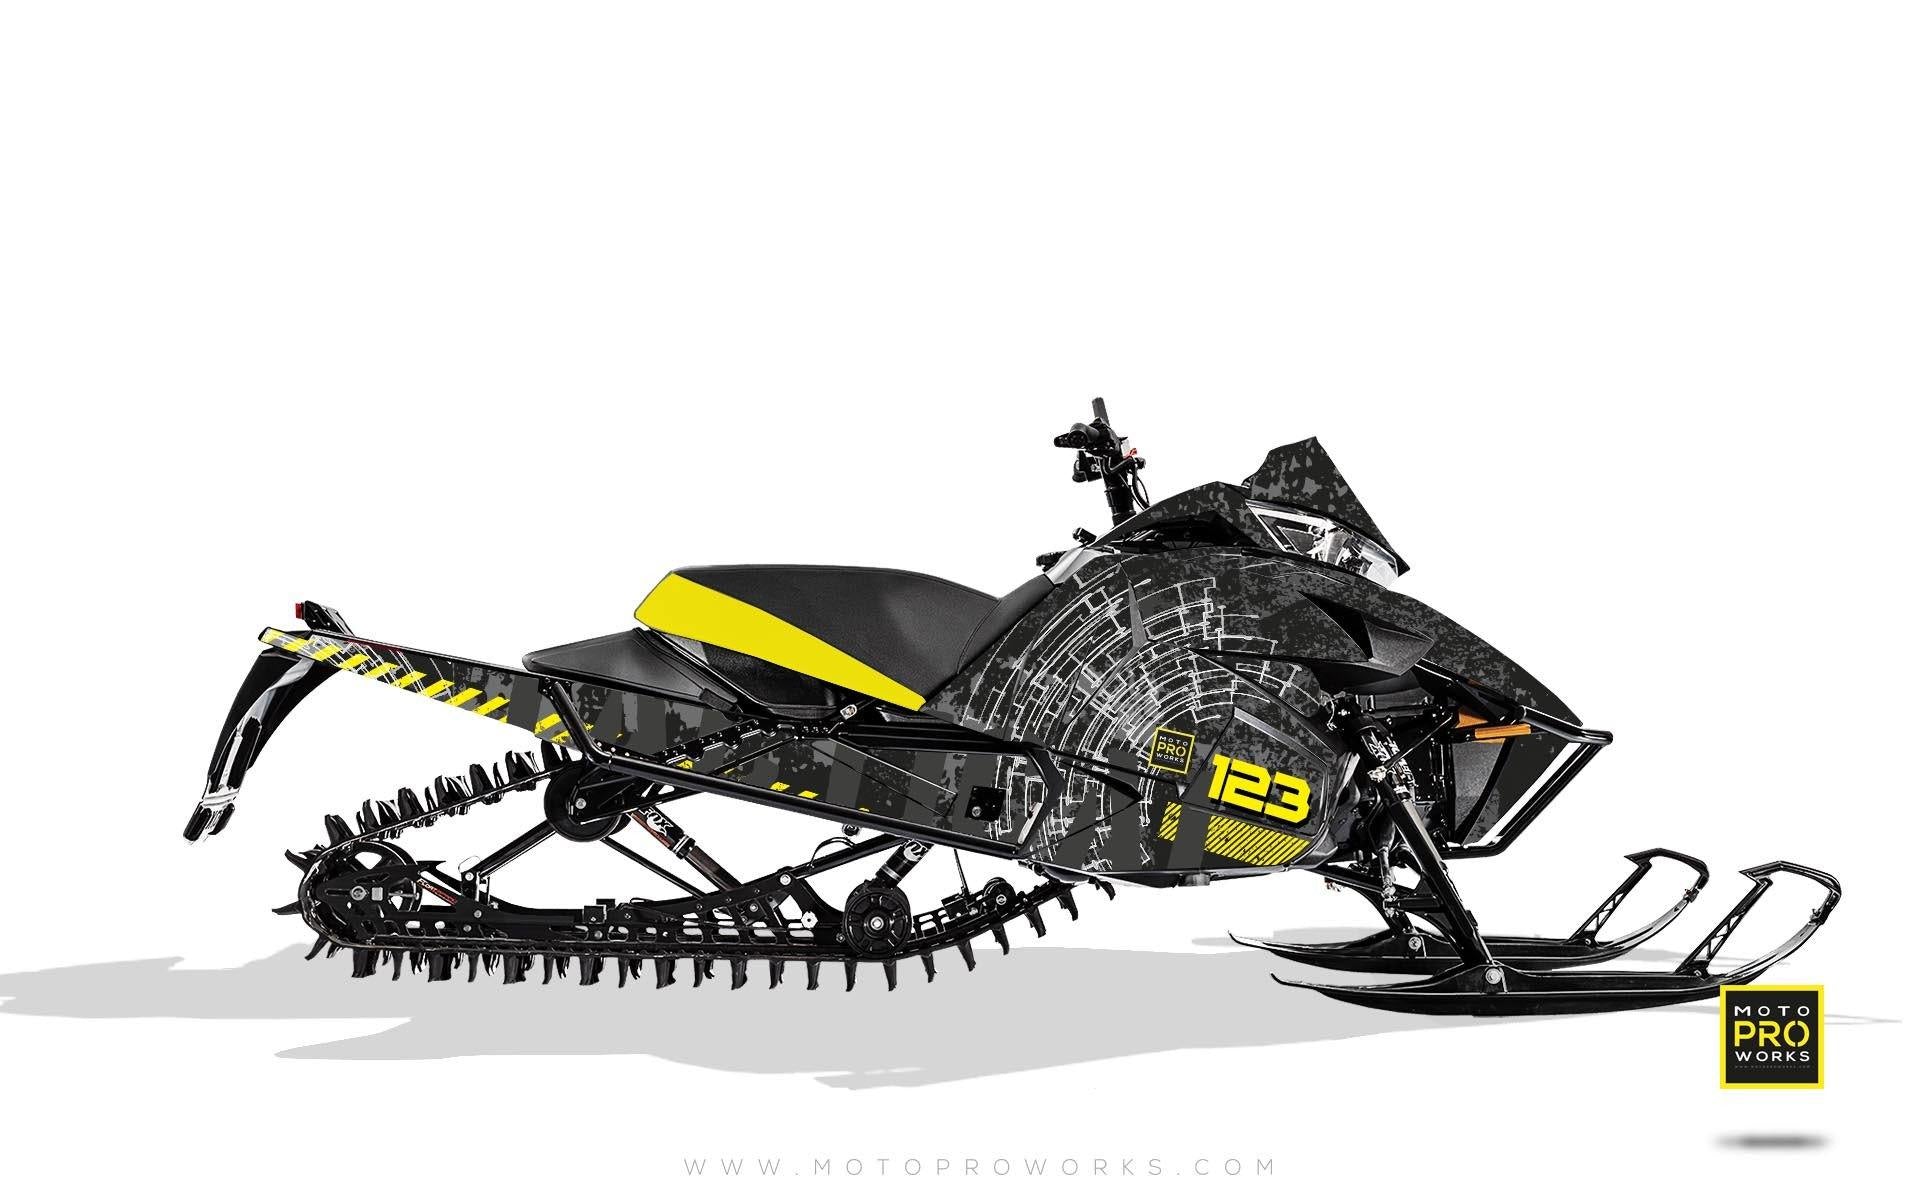 Arctic Cat Graphics - "Tactical" (black) - MotoProWorks | Decals and Bike Graphic kit